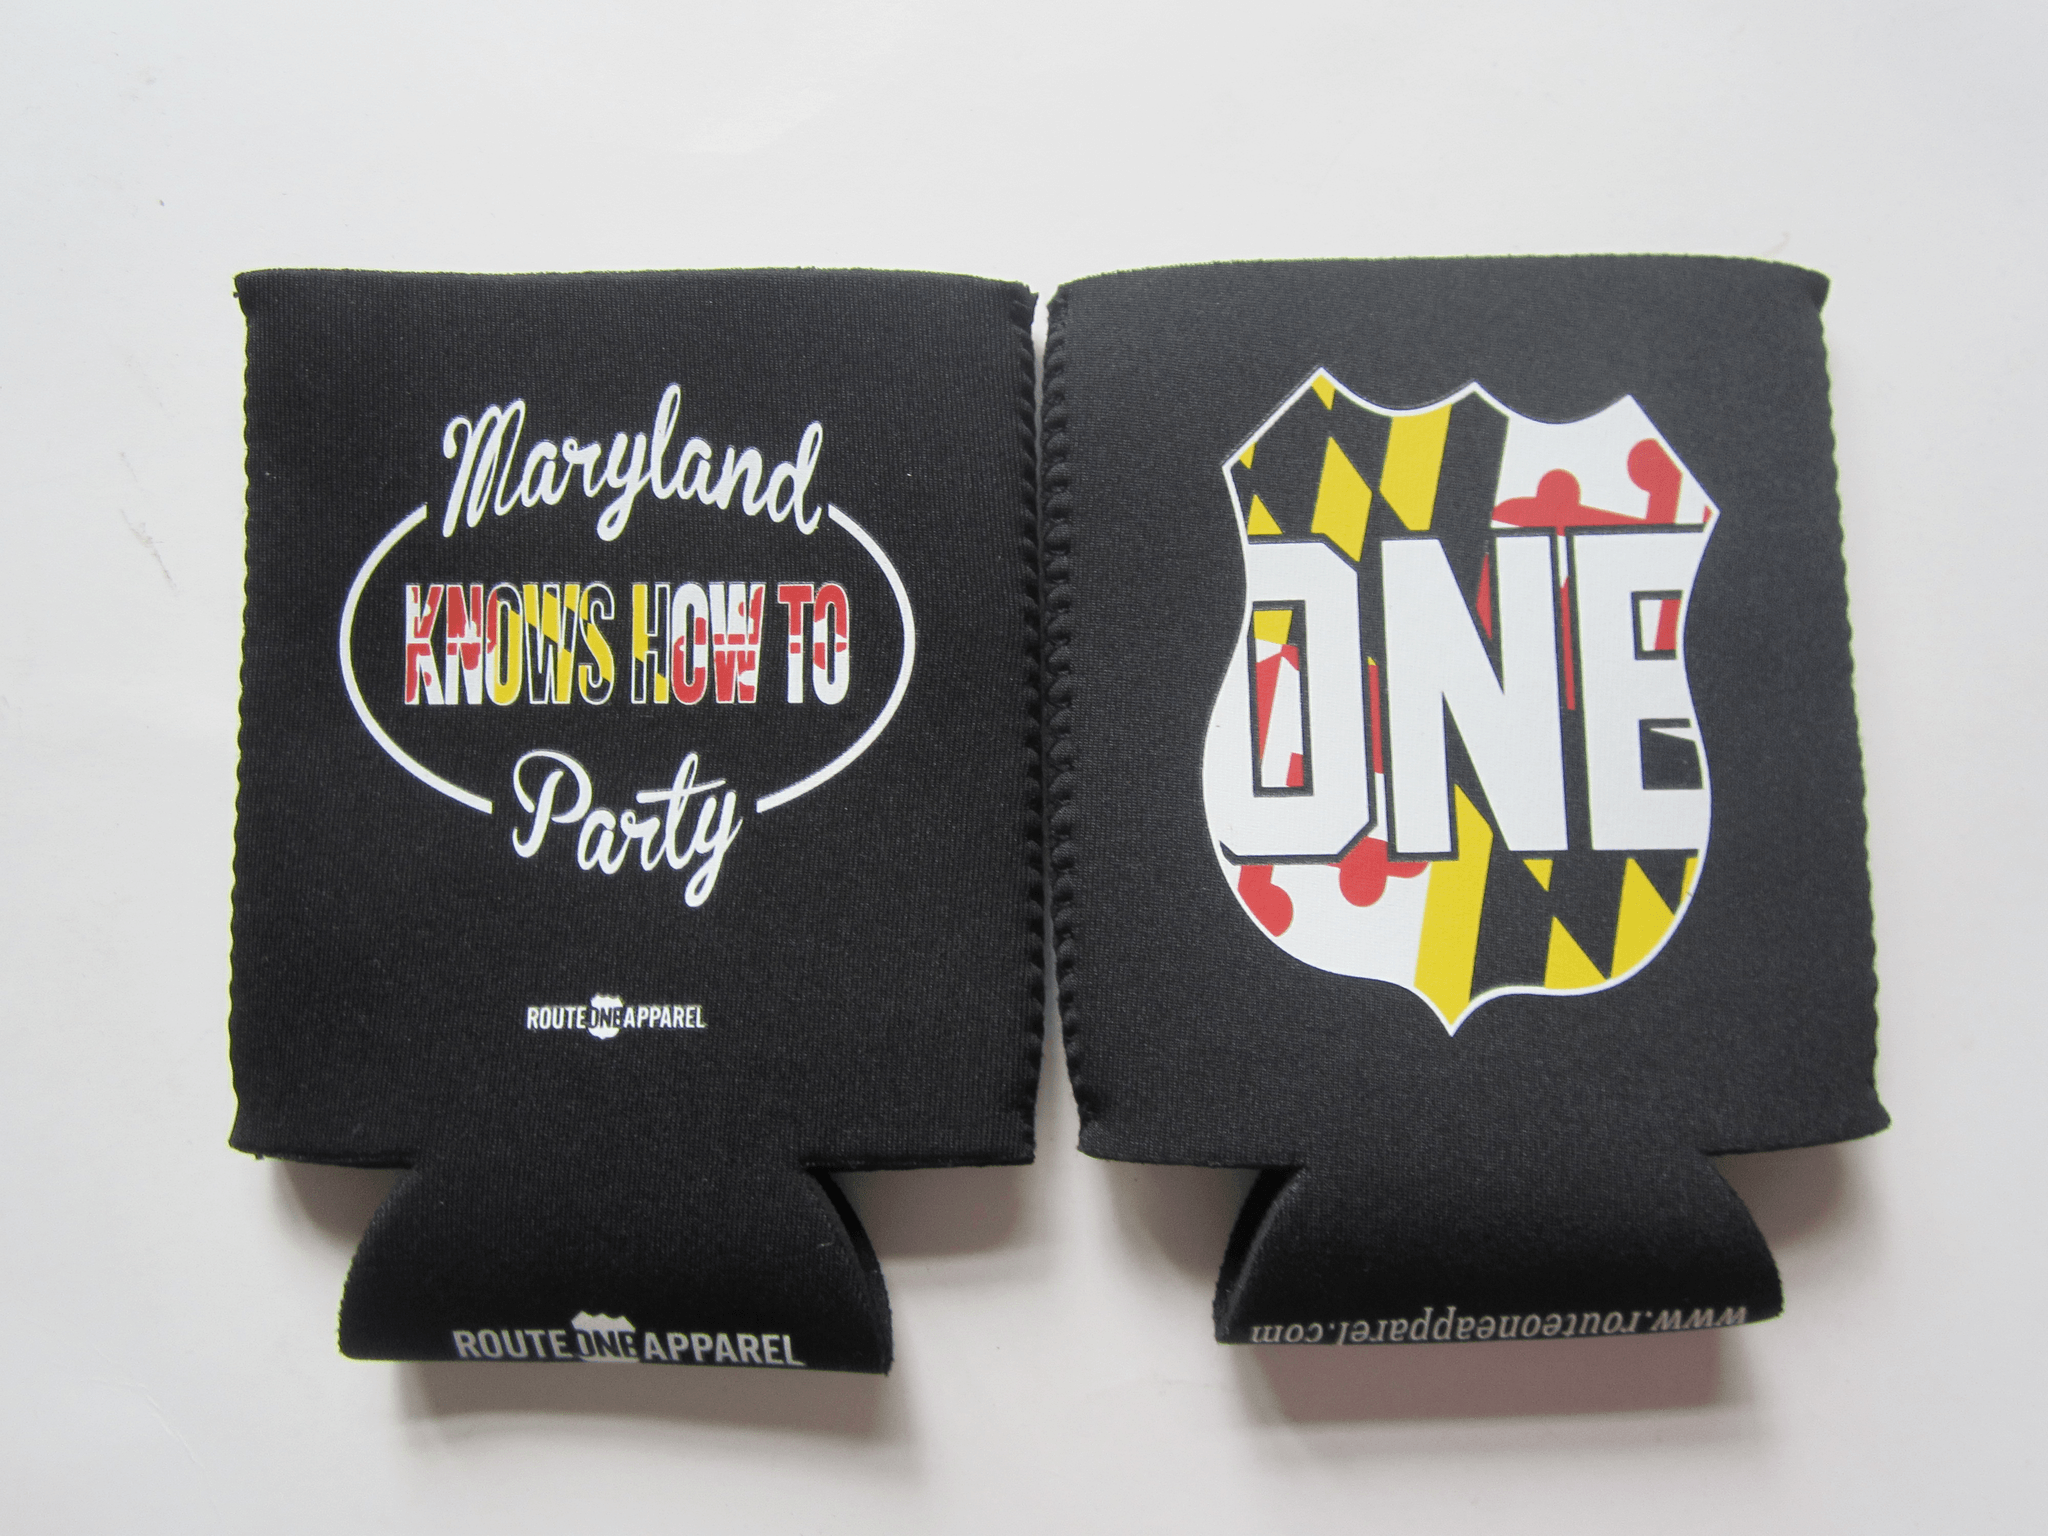 Maryland Knows How to Party / Can Cooler - Route One Apparel